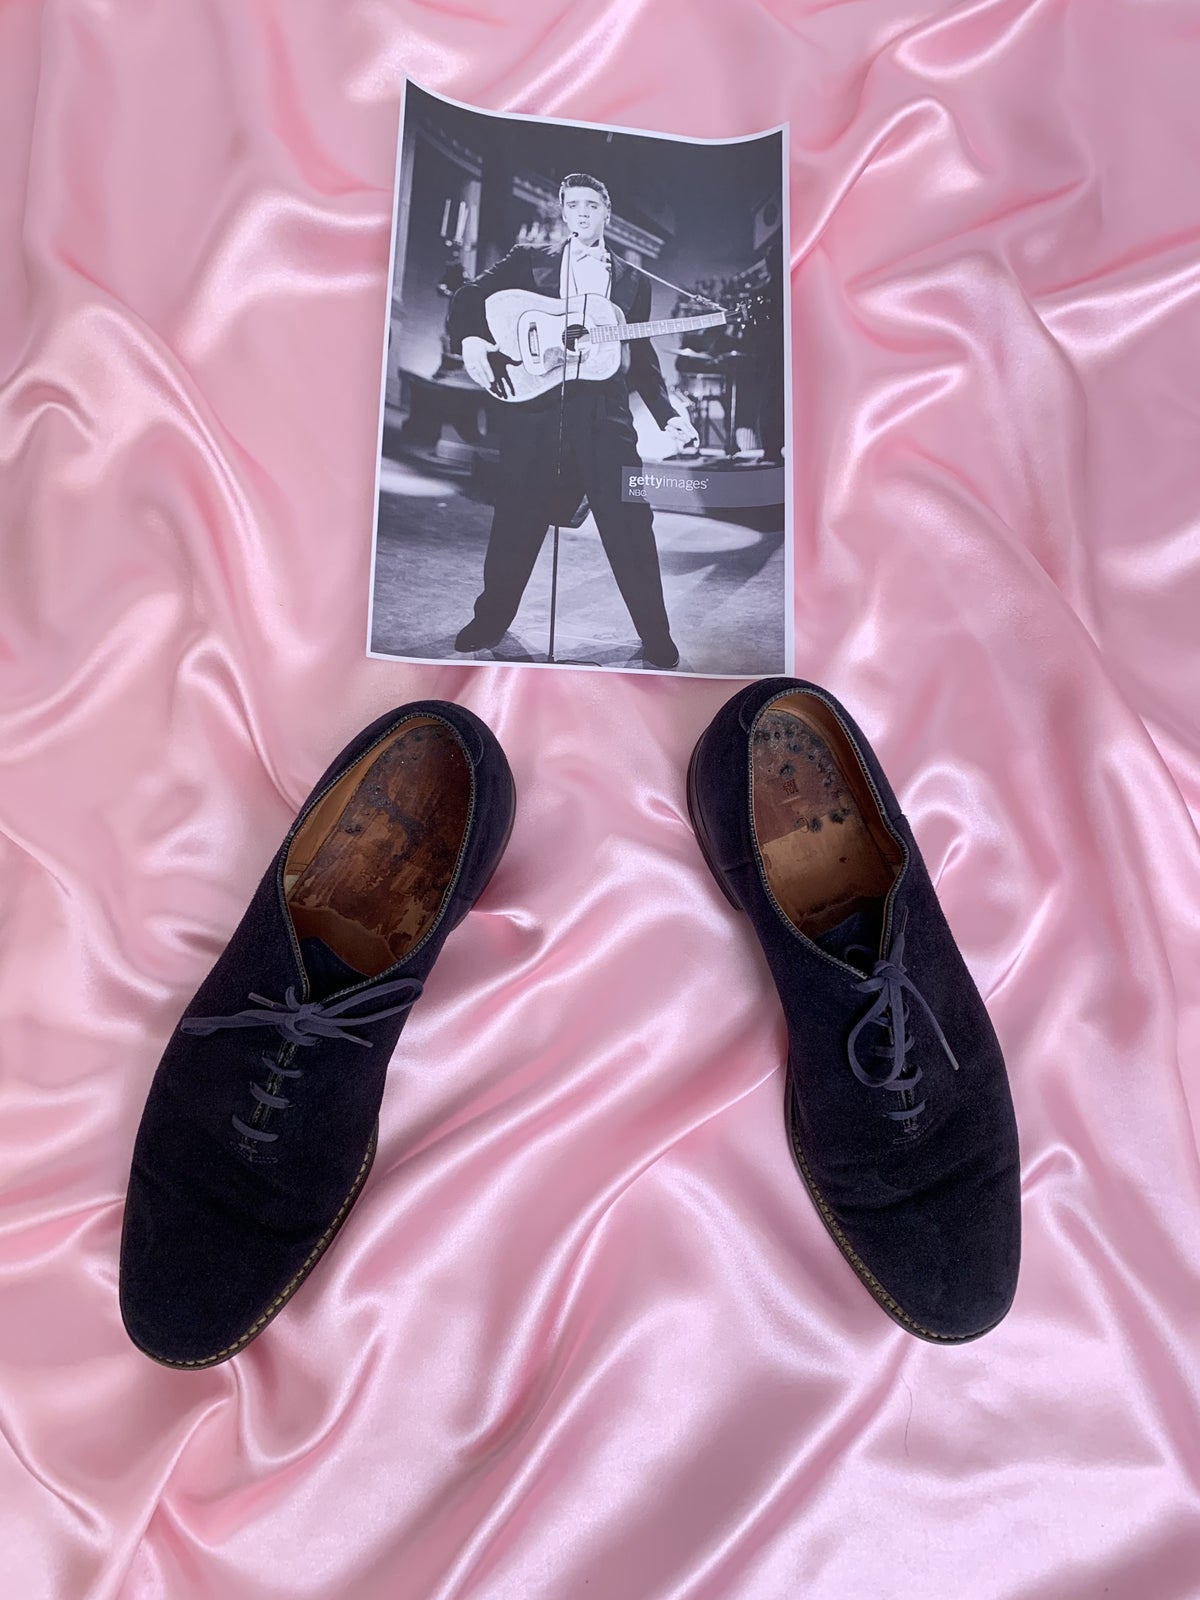 One for the money: Elvis Presley’s blue suede shoes go for six figures at auction